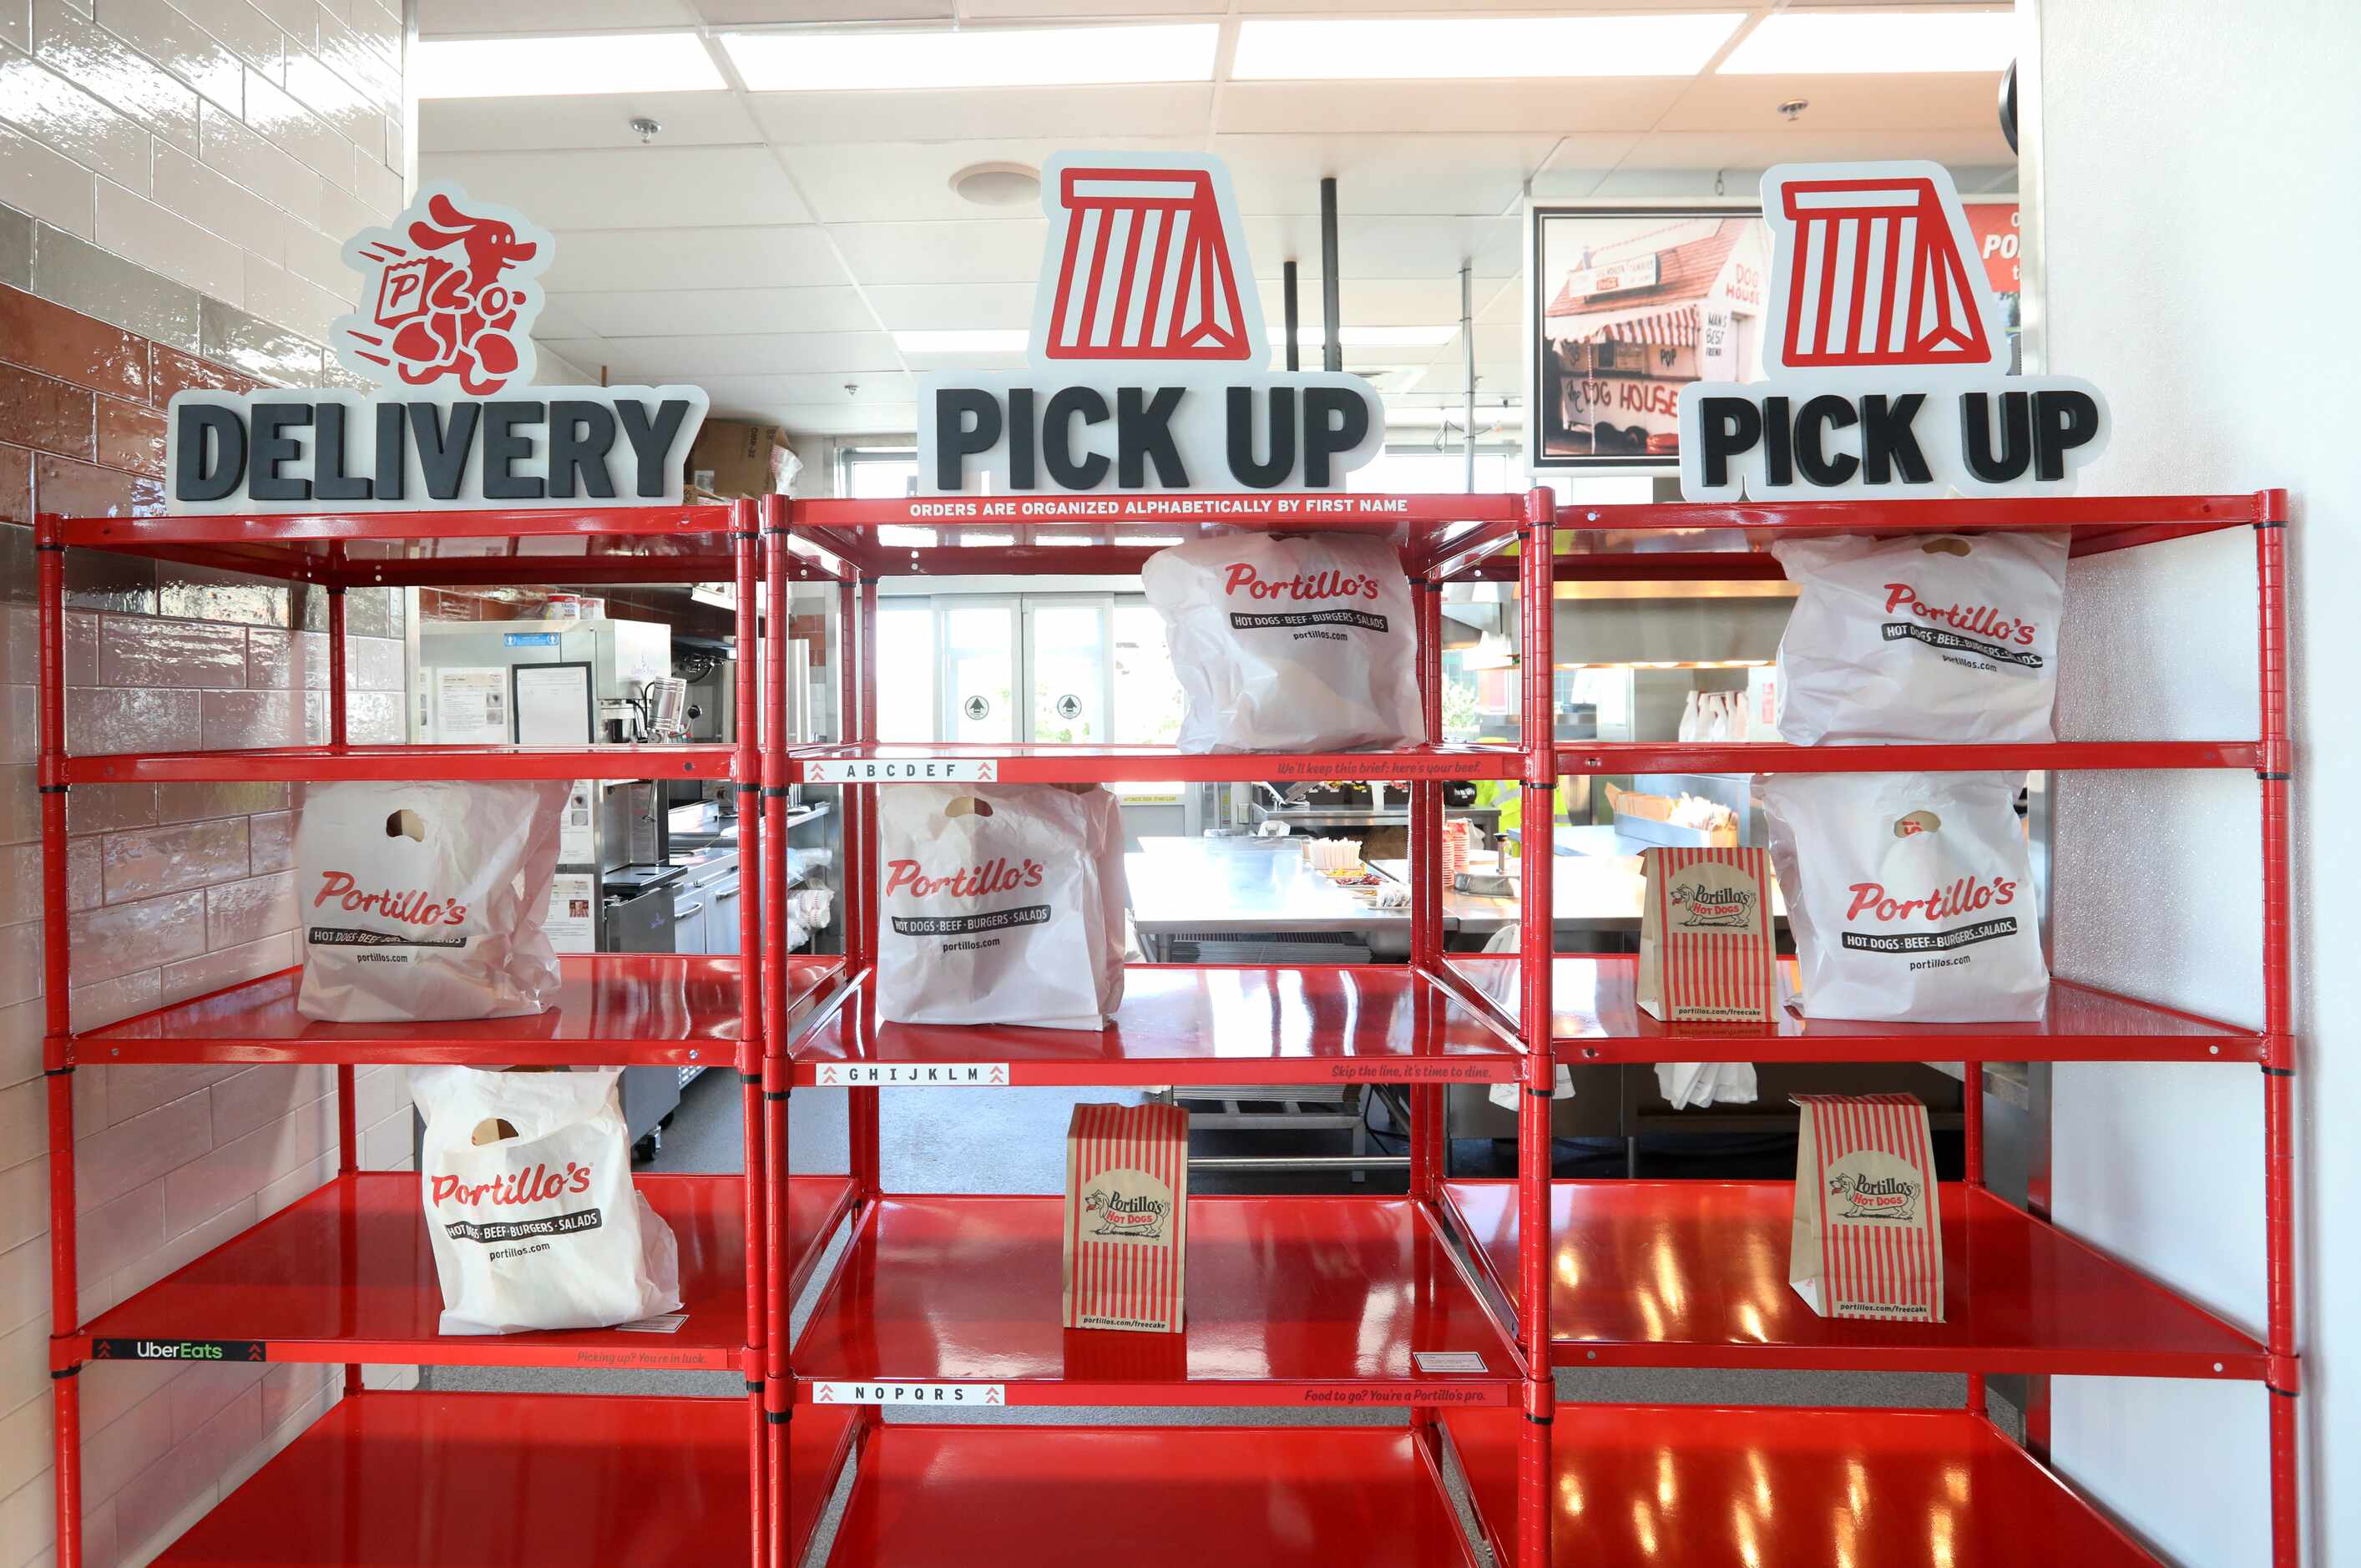 The Portillo's in Allen has an order pick-up area.